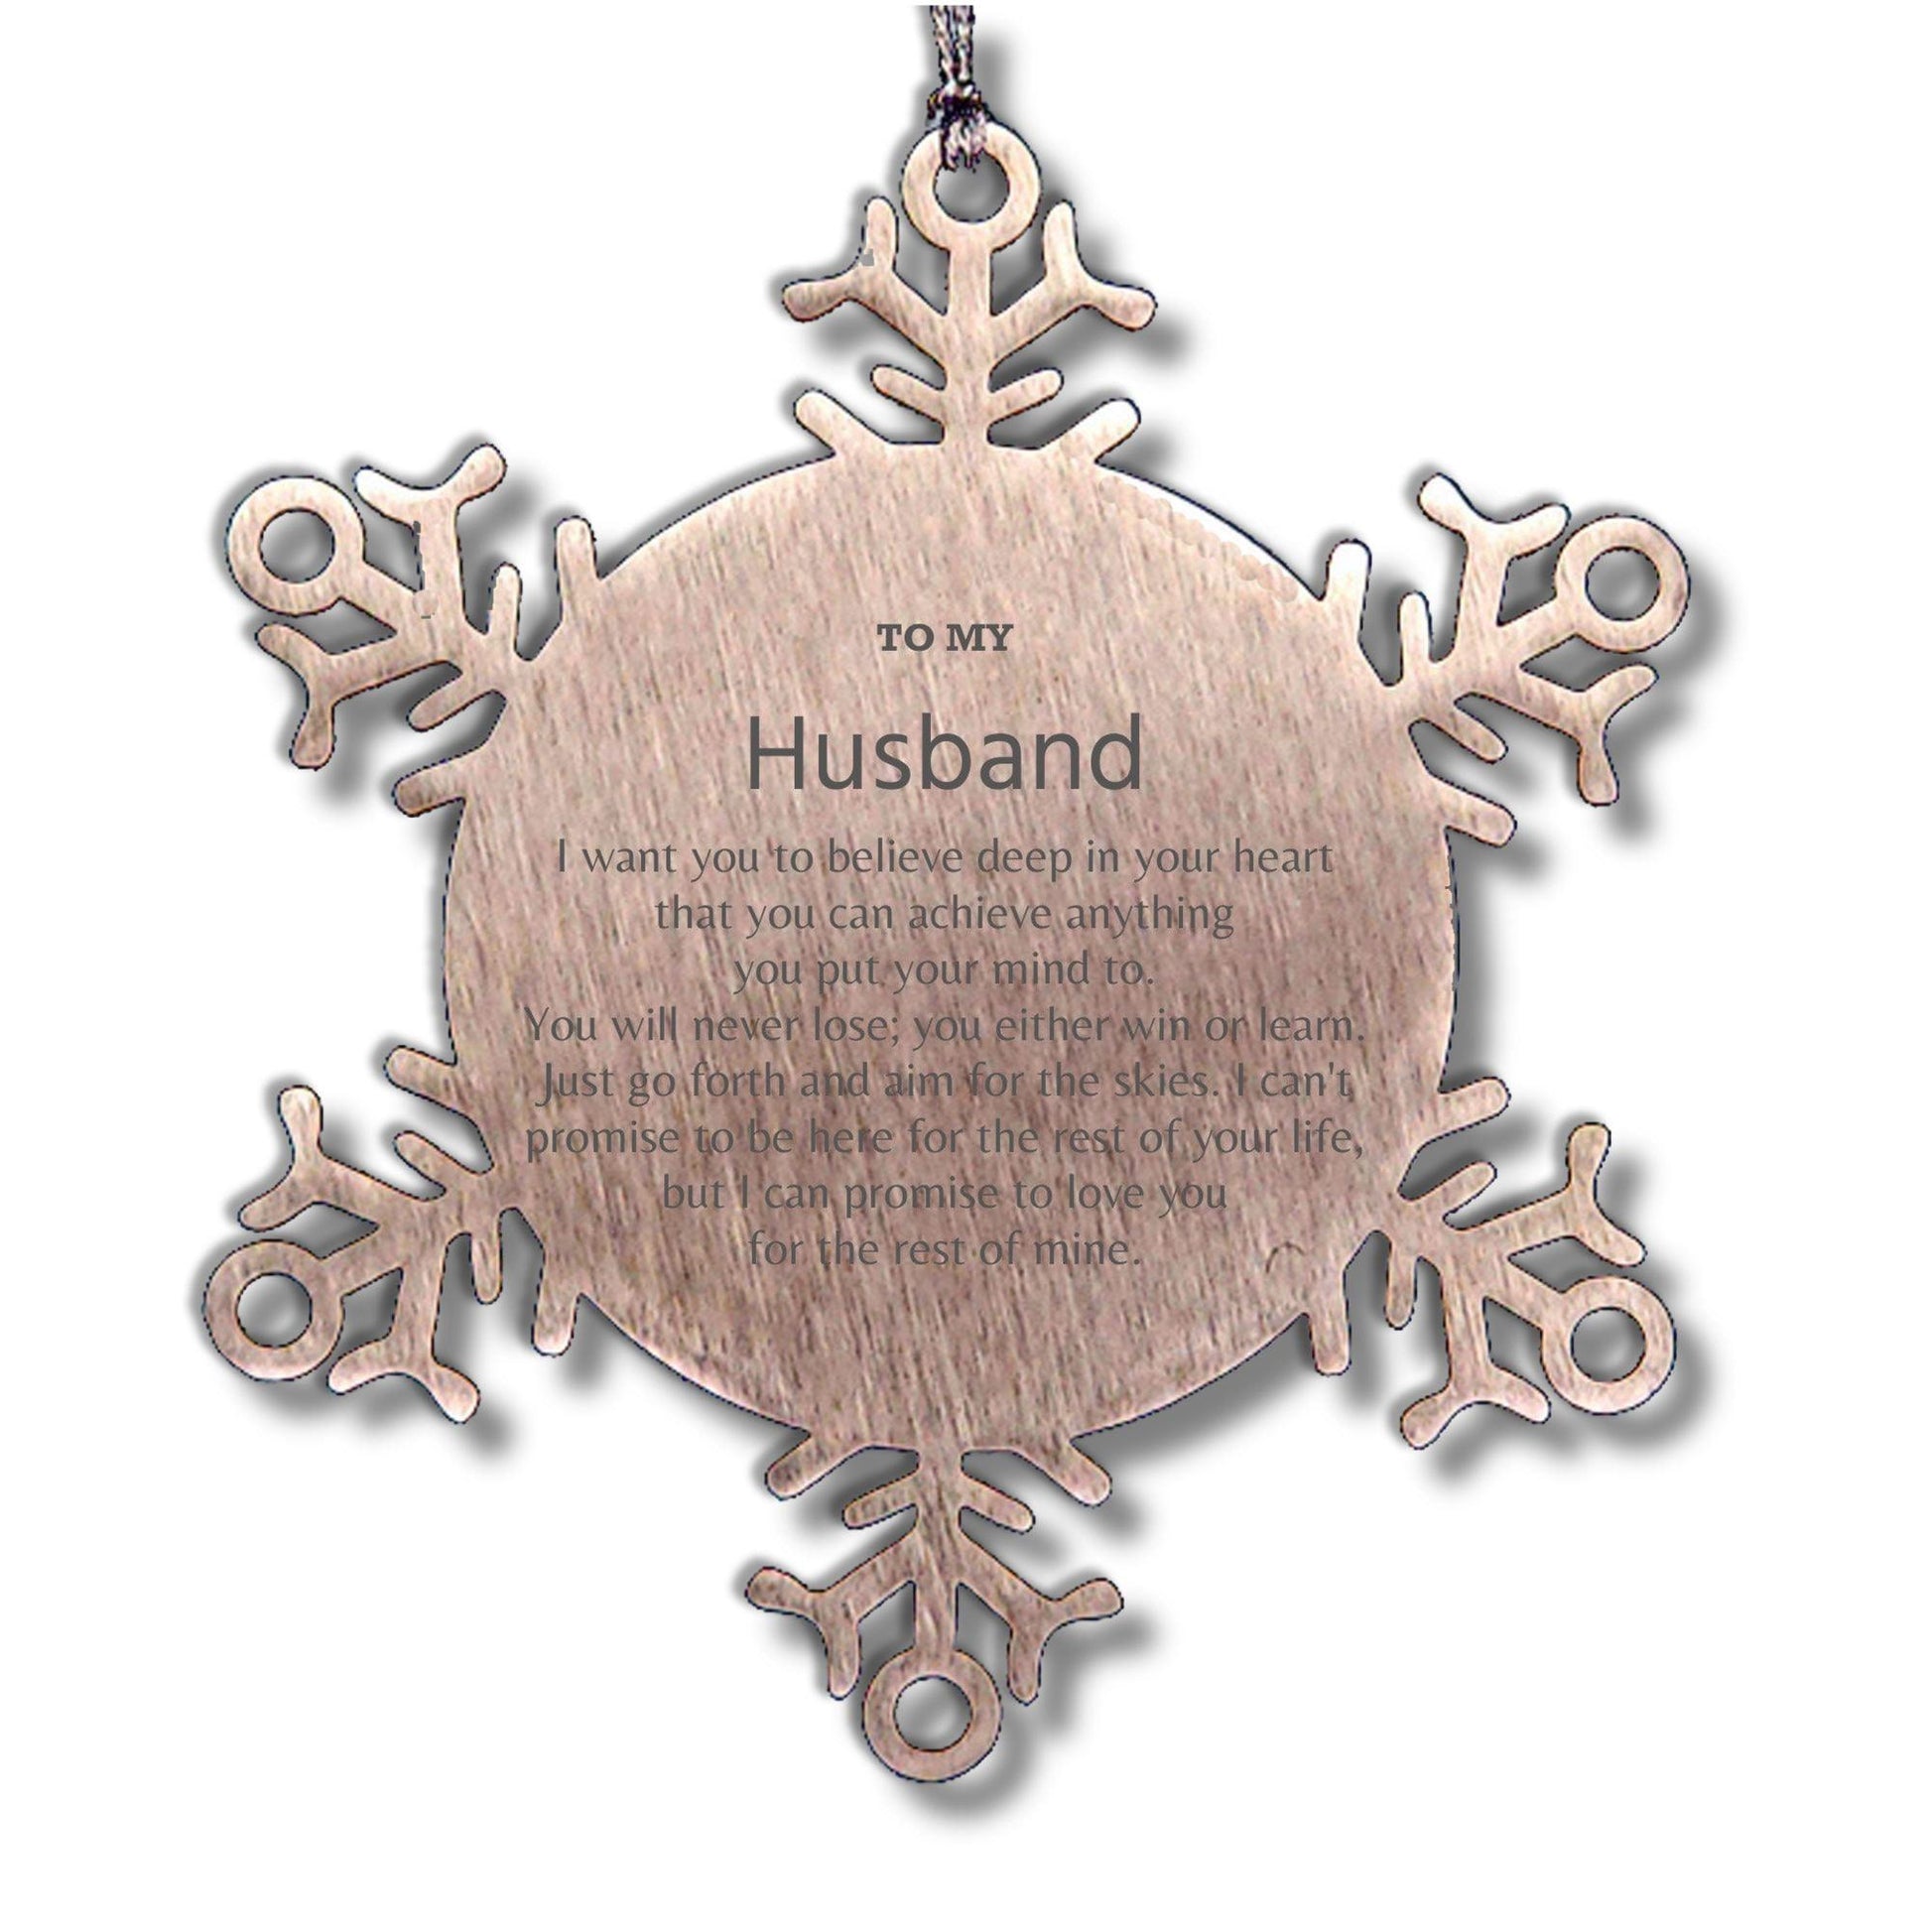 Motivational Husband Snowflake Ornament, Husband I can promise to love you for the rest of mine, Christmas Birthday Gift - Mallard Moon Gift Shop